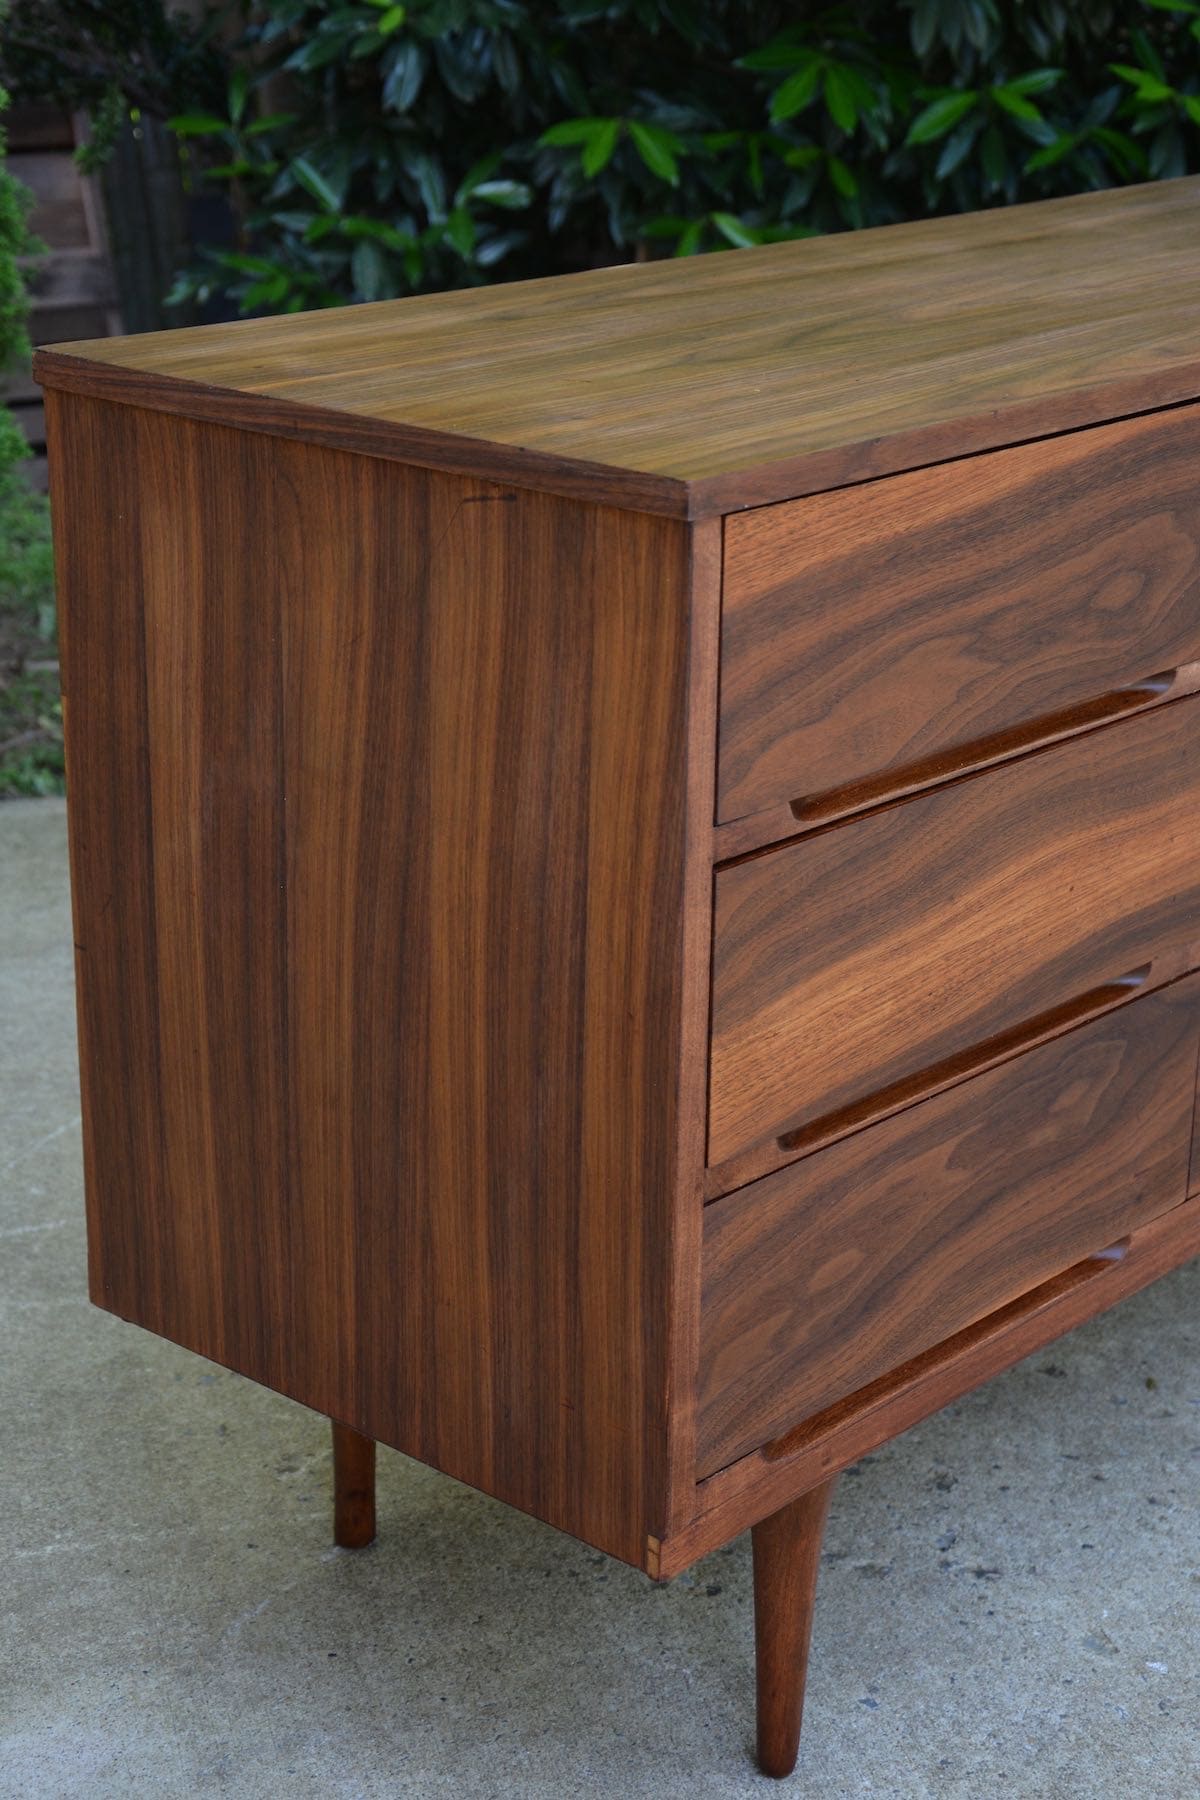 Mid-Century Modern Dresser Makeover Stripped and Refinished - Pretty wood grain in dresser makeover using tung oil. The grain is gorgeous! - Thrift Diving